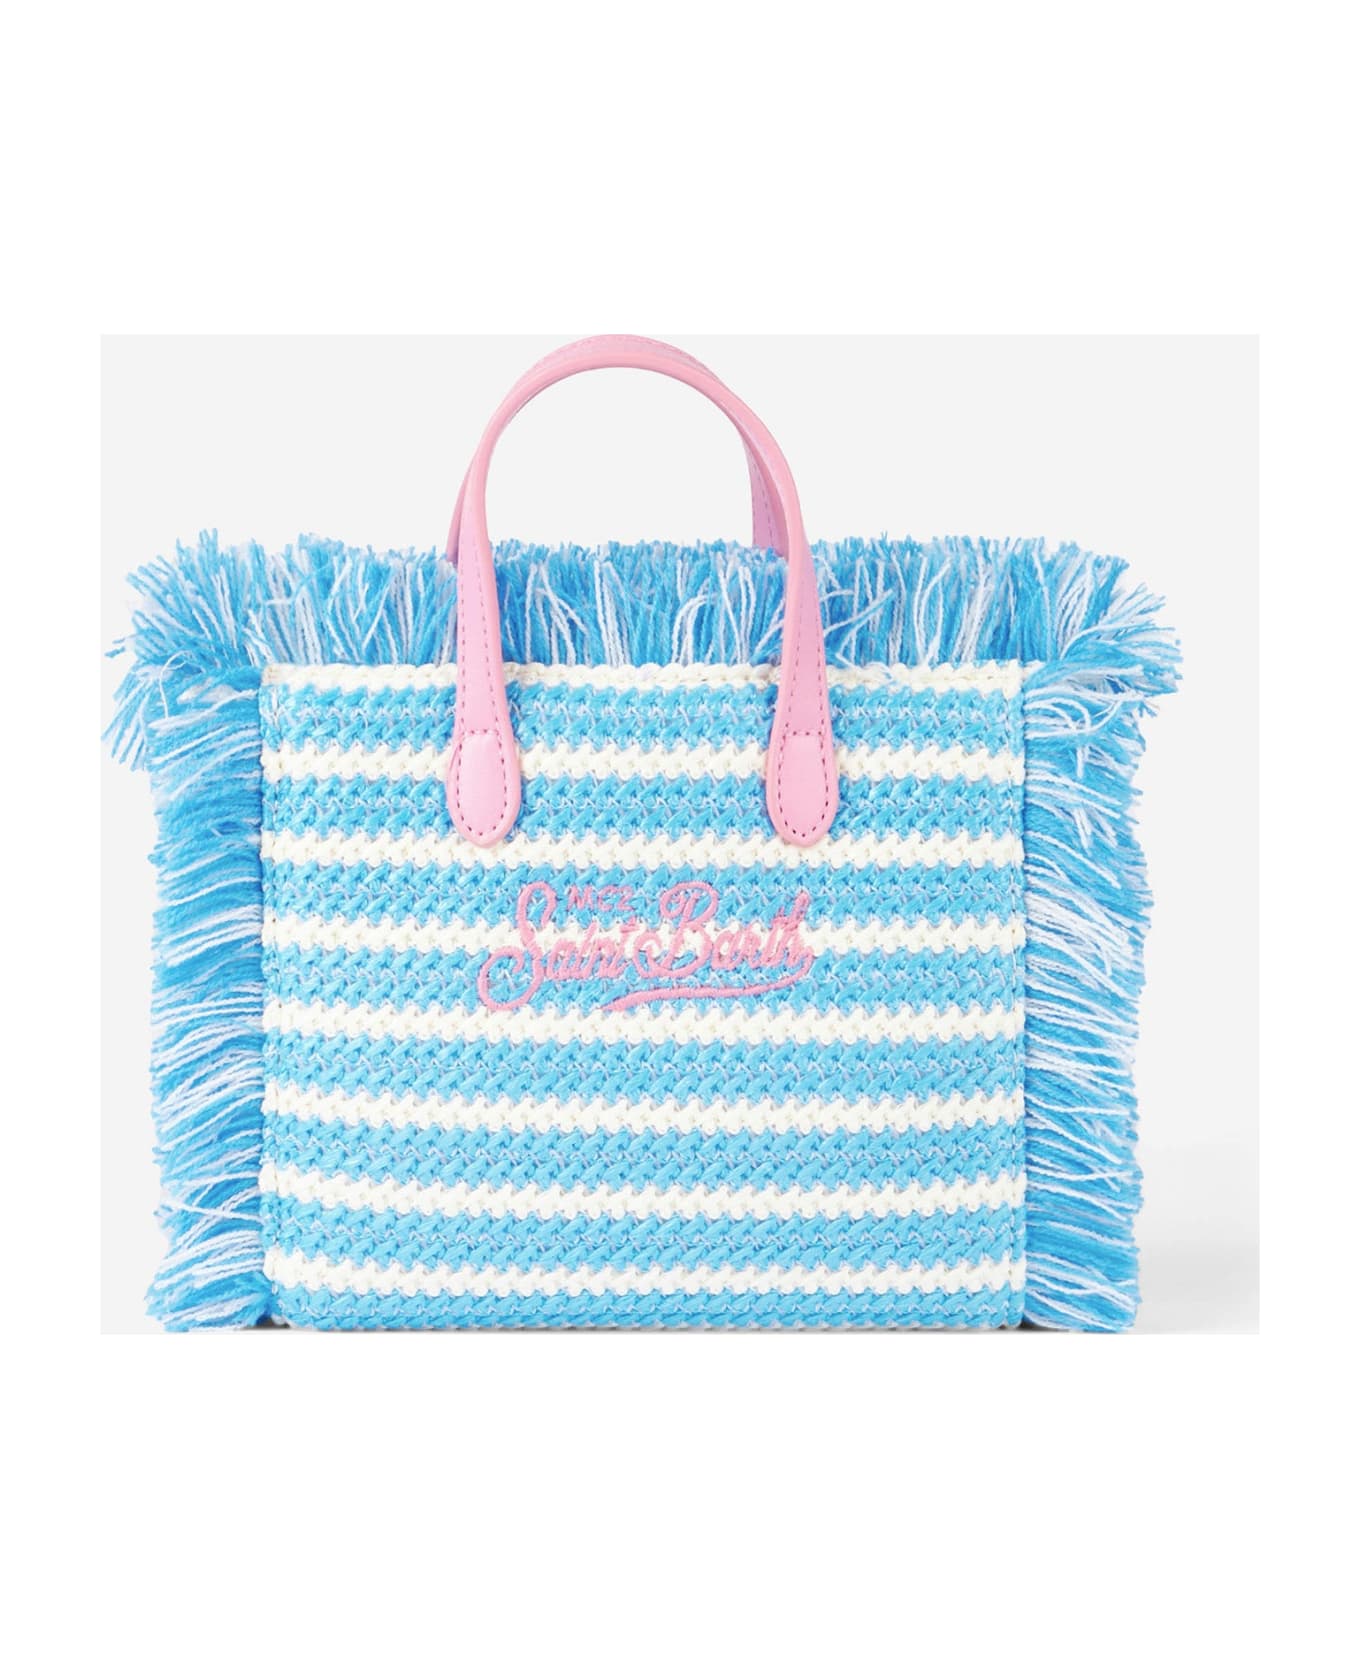 MC2 Saint Barth Mini Vanity Straw Bag With Embroidery And Stripes - SKY トートバッグ